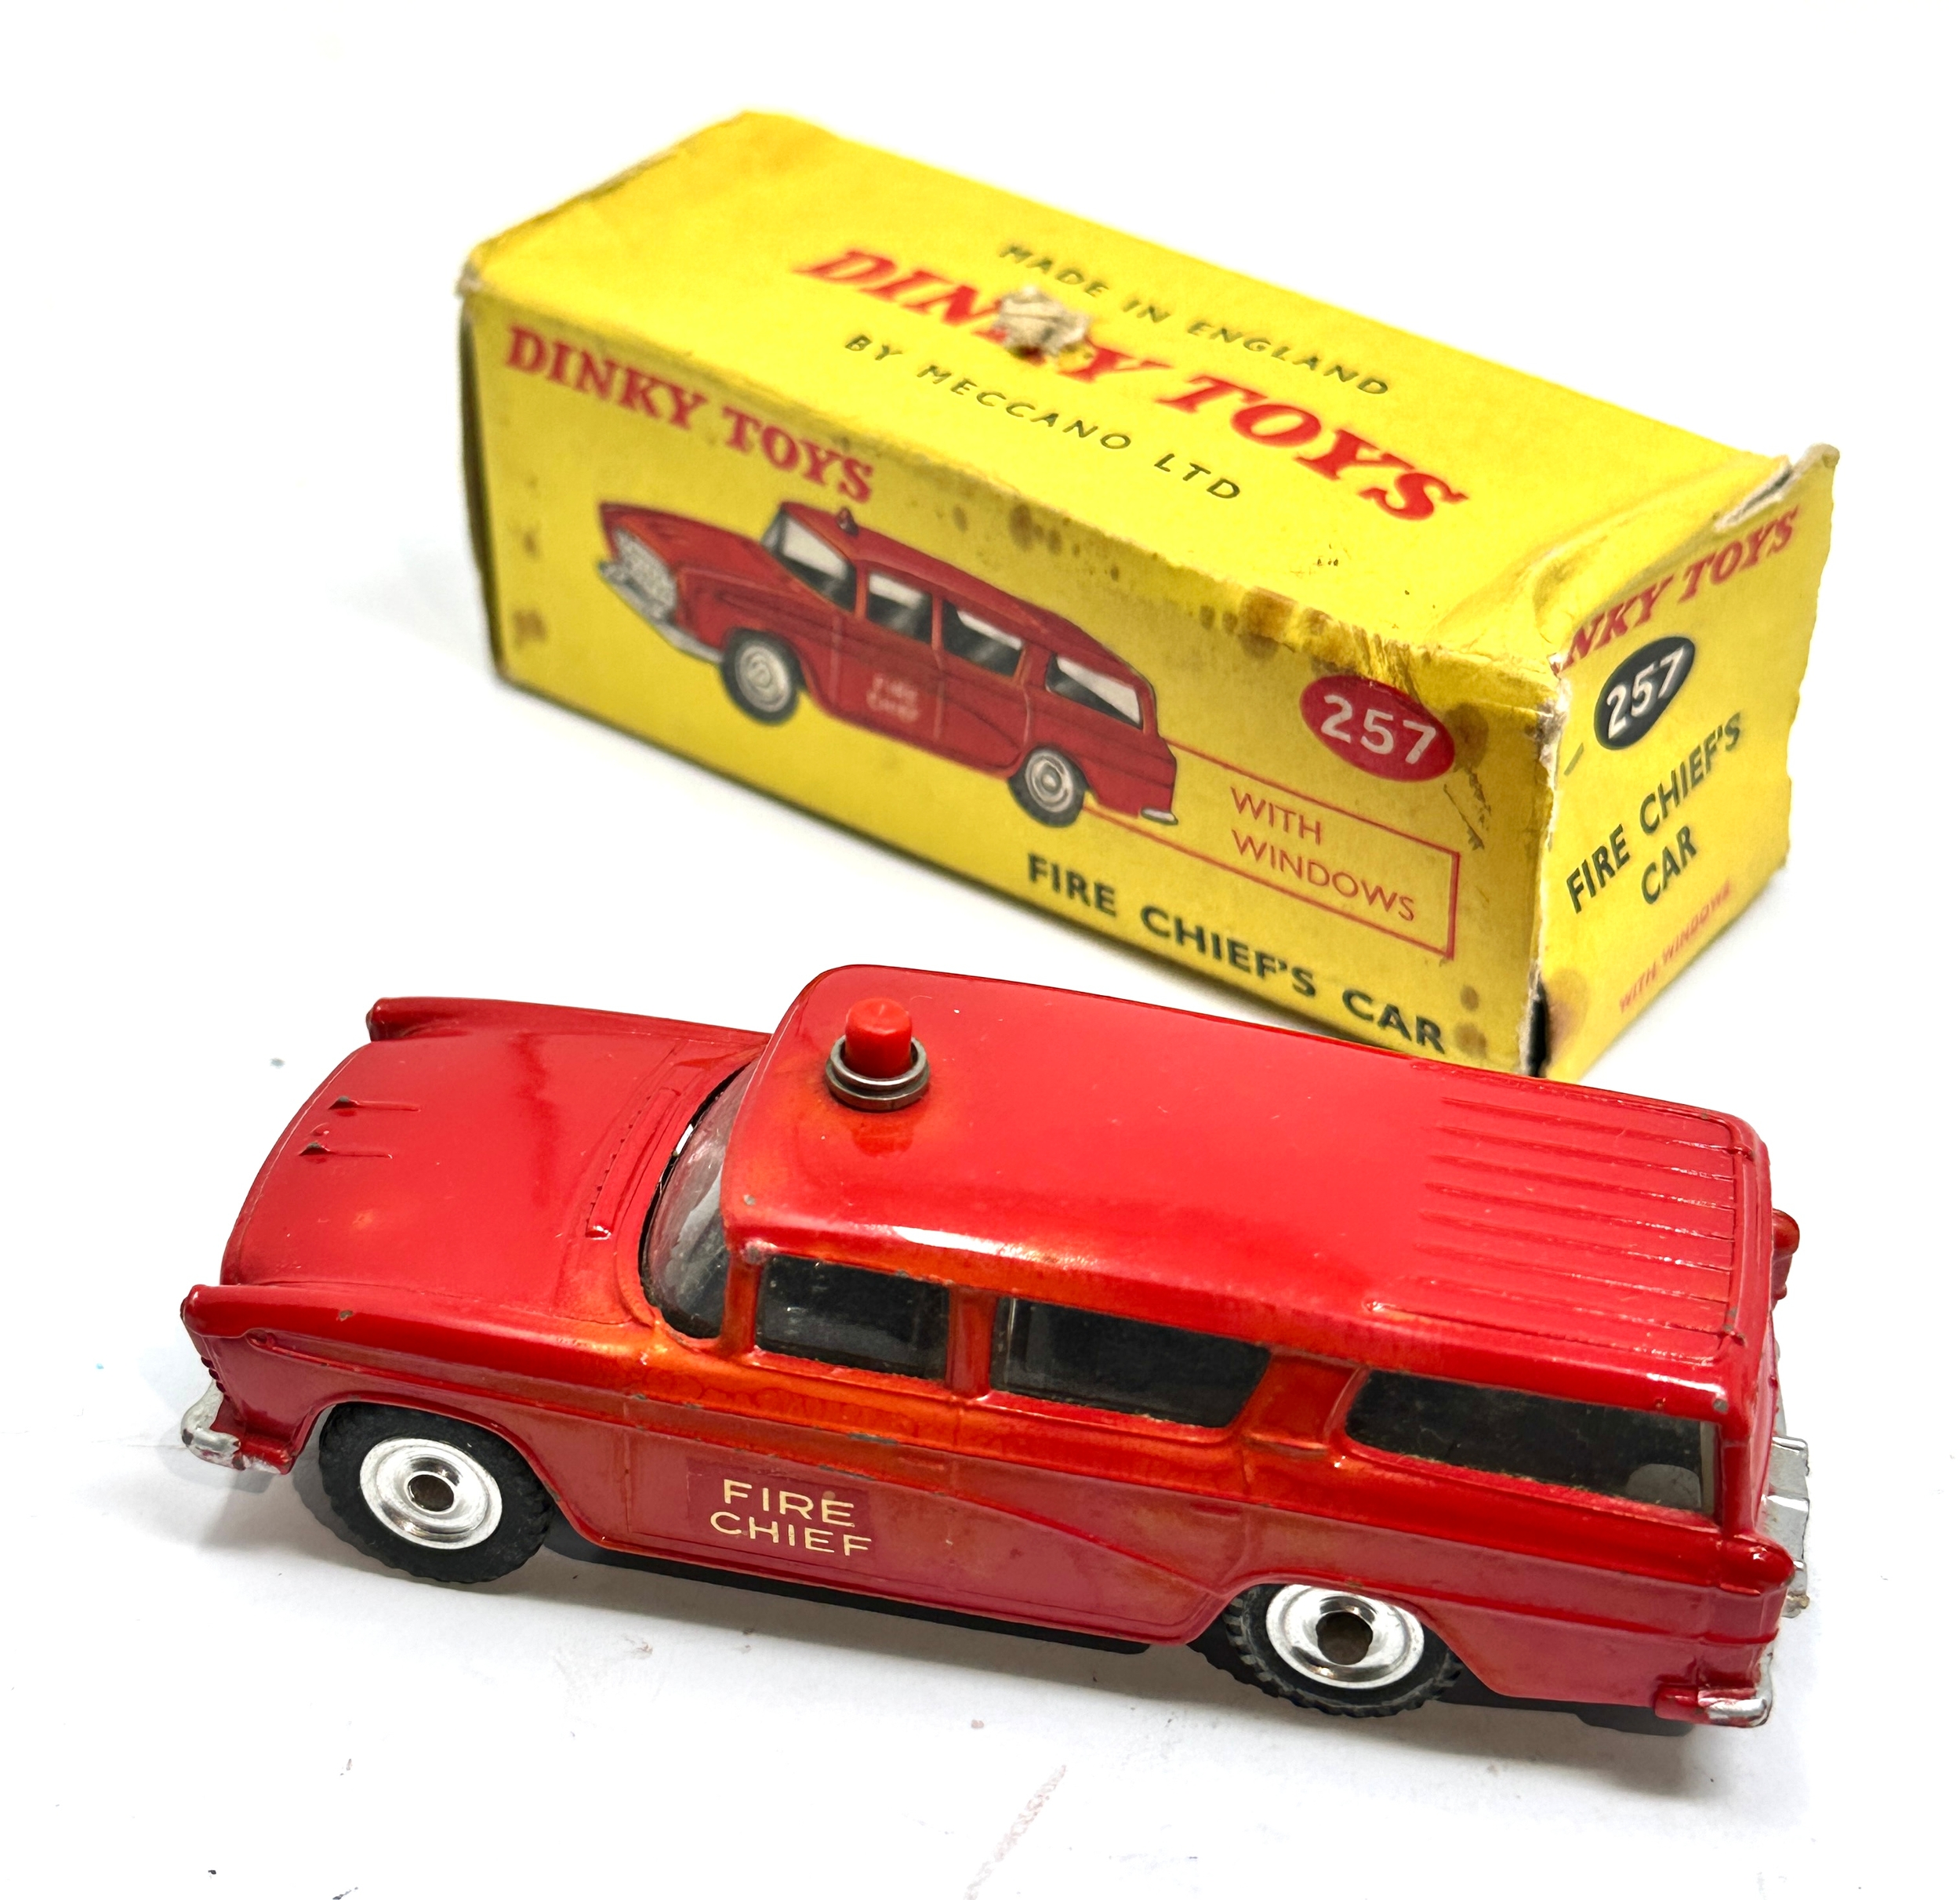 DINKY TOYS 257 Fire Chief’s Car Boxed - Image 2 of 3